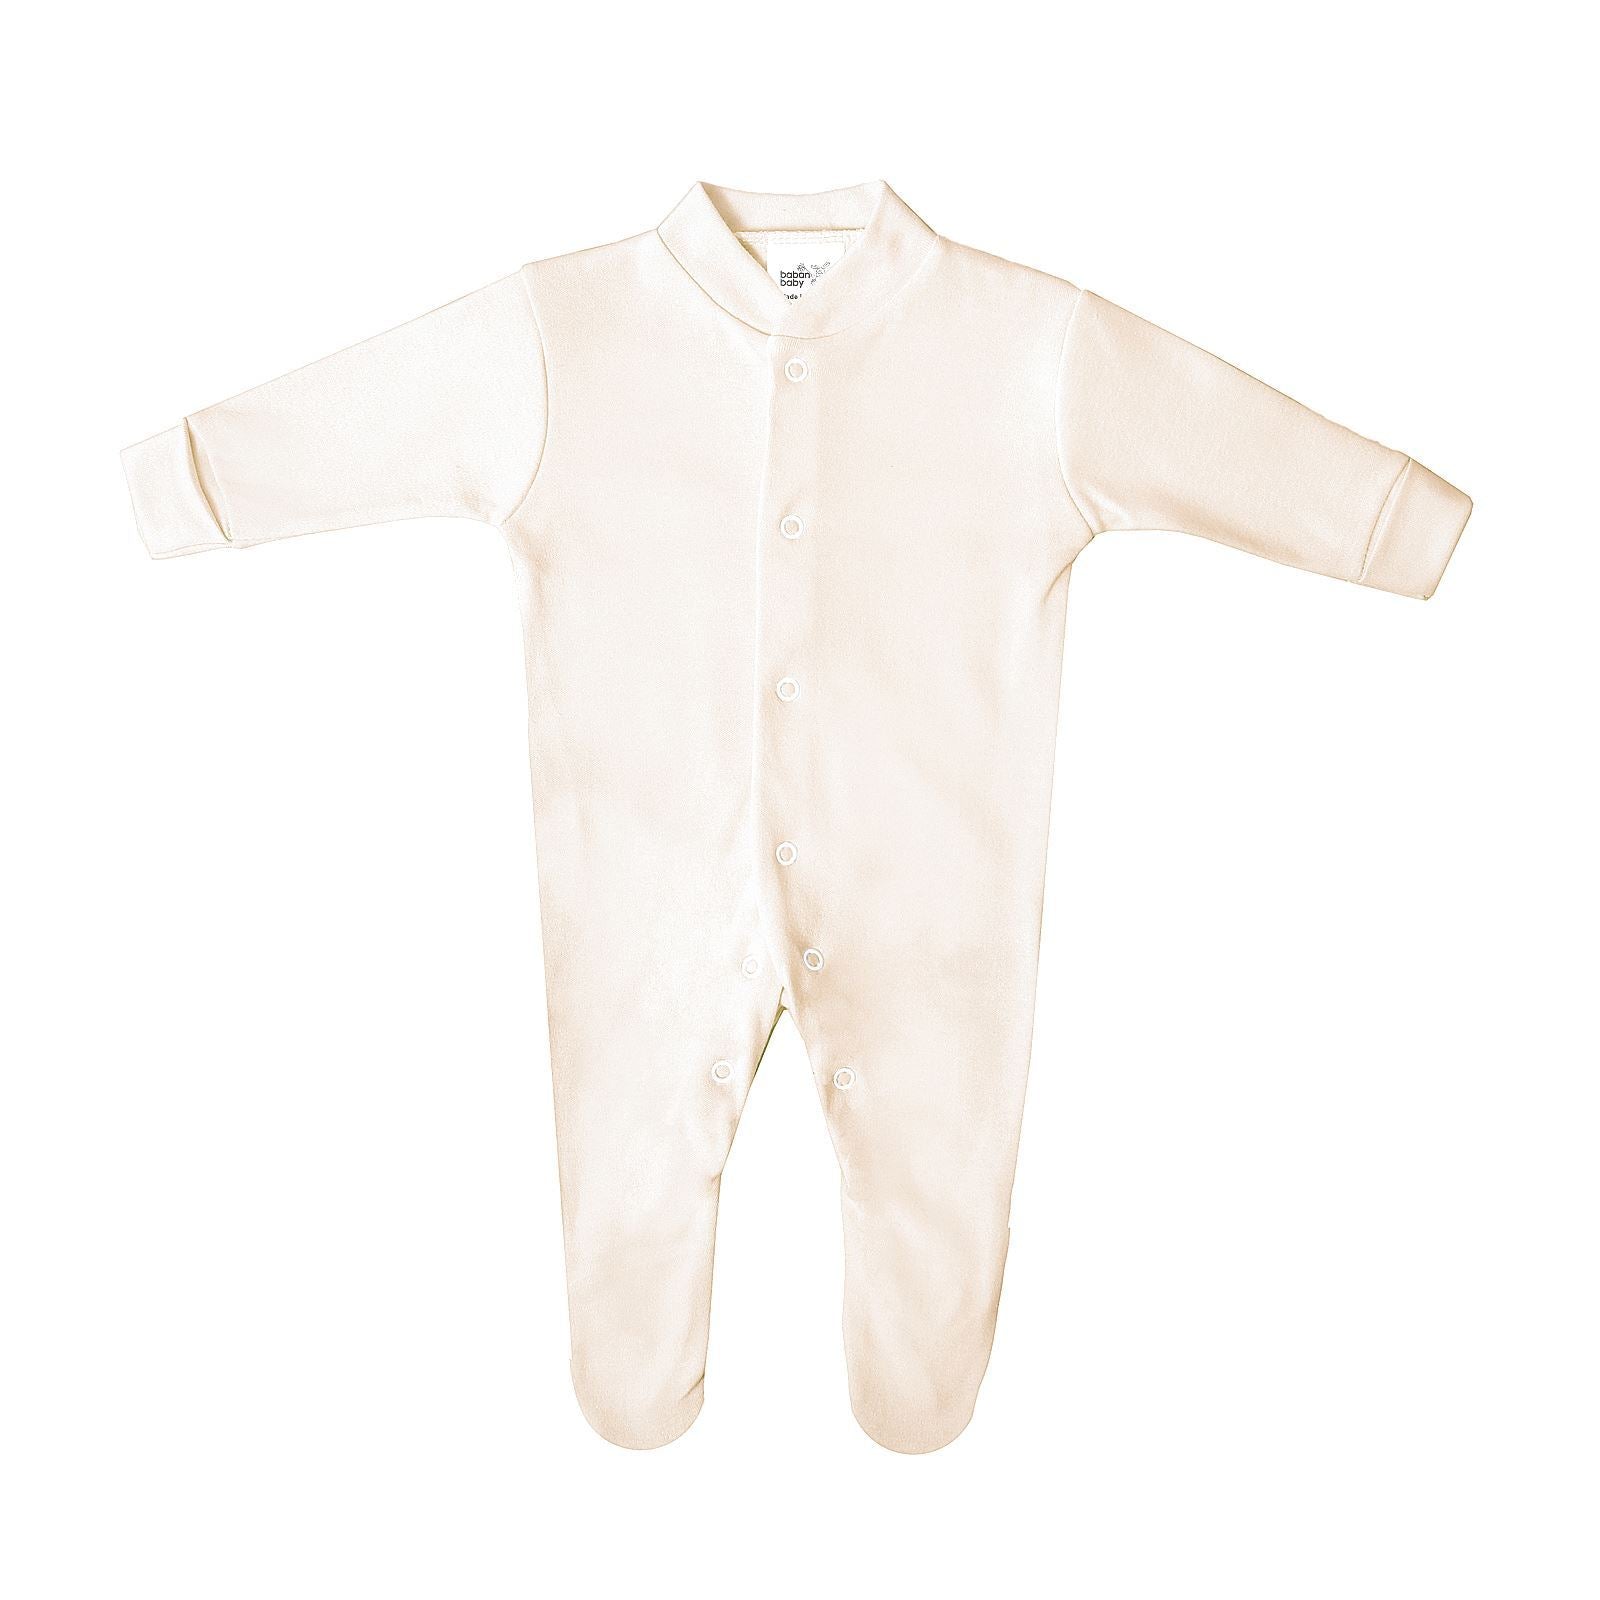 Premature Tiny Baby Sleepsuits, Boys & Girls Baby Grows, 2 Pack, Cream